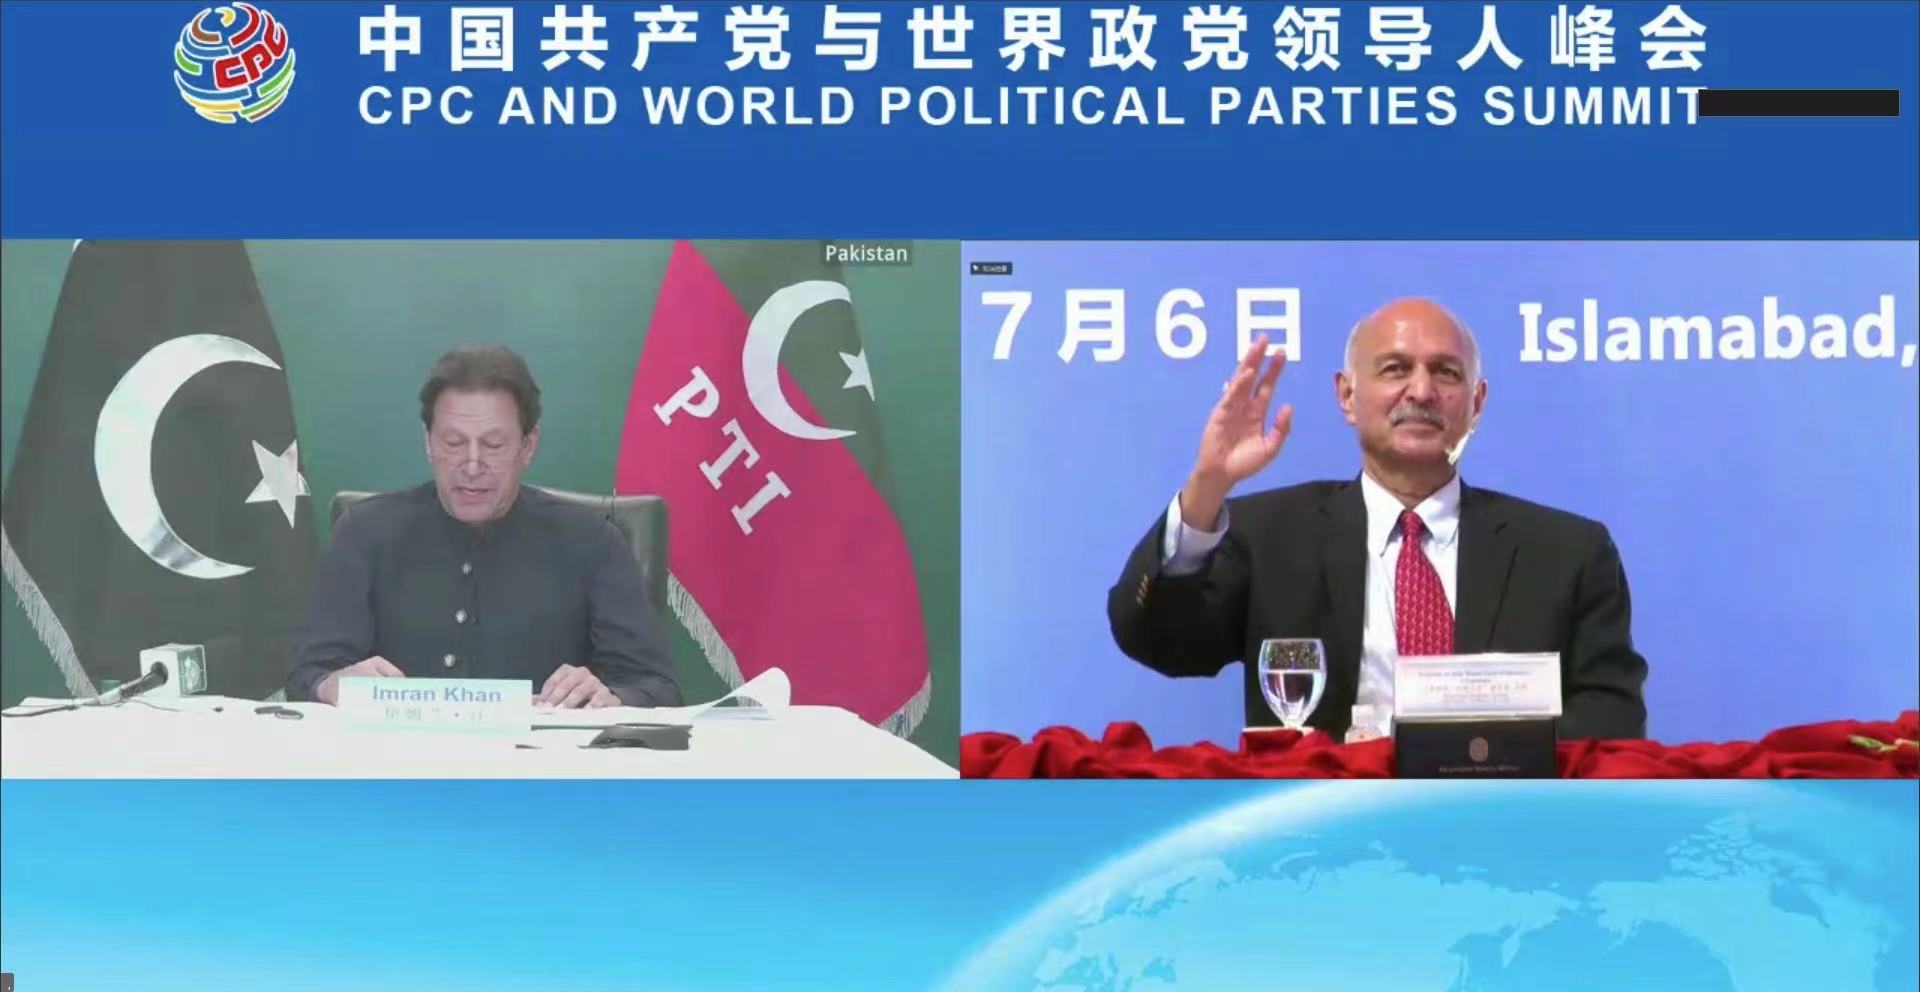 Pakistan joins China in celebrating 100 years of Communist Party of China, Speakers at the Friends of Silk Road event highlight the multifaceted Pak-China relationship